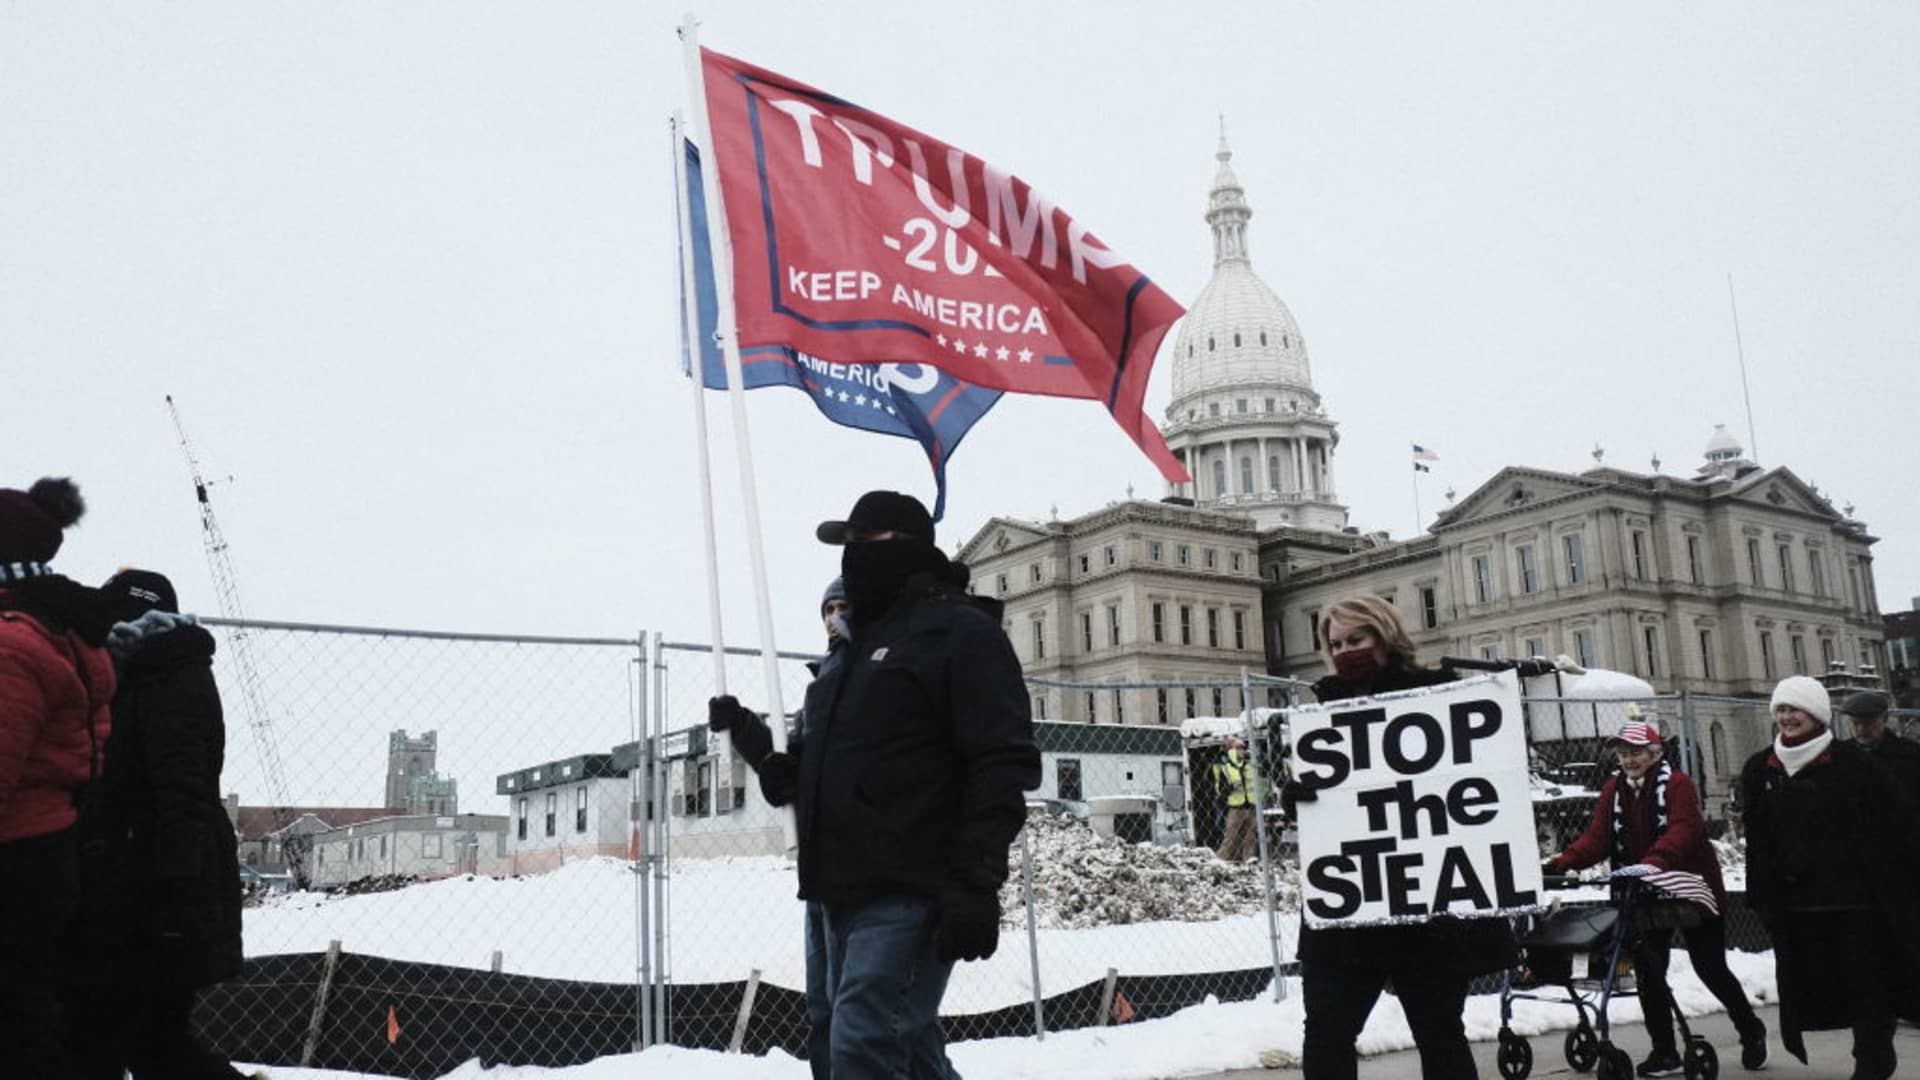 Donald Trump Supporters march around the Michigan State Capitol Building to protest the certification of Joe Biden as the next president of the United States on January 6, 2021 in Lansing, Michigan.